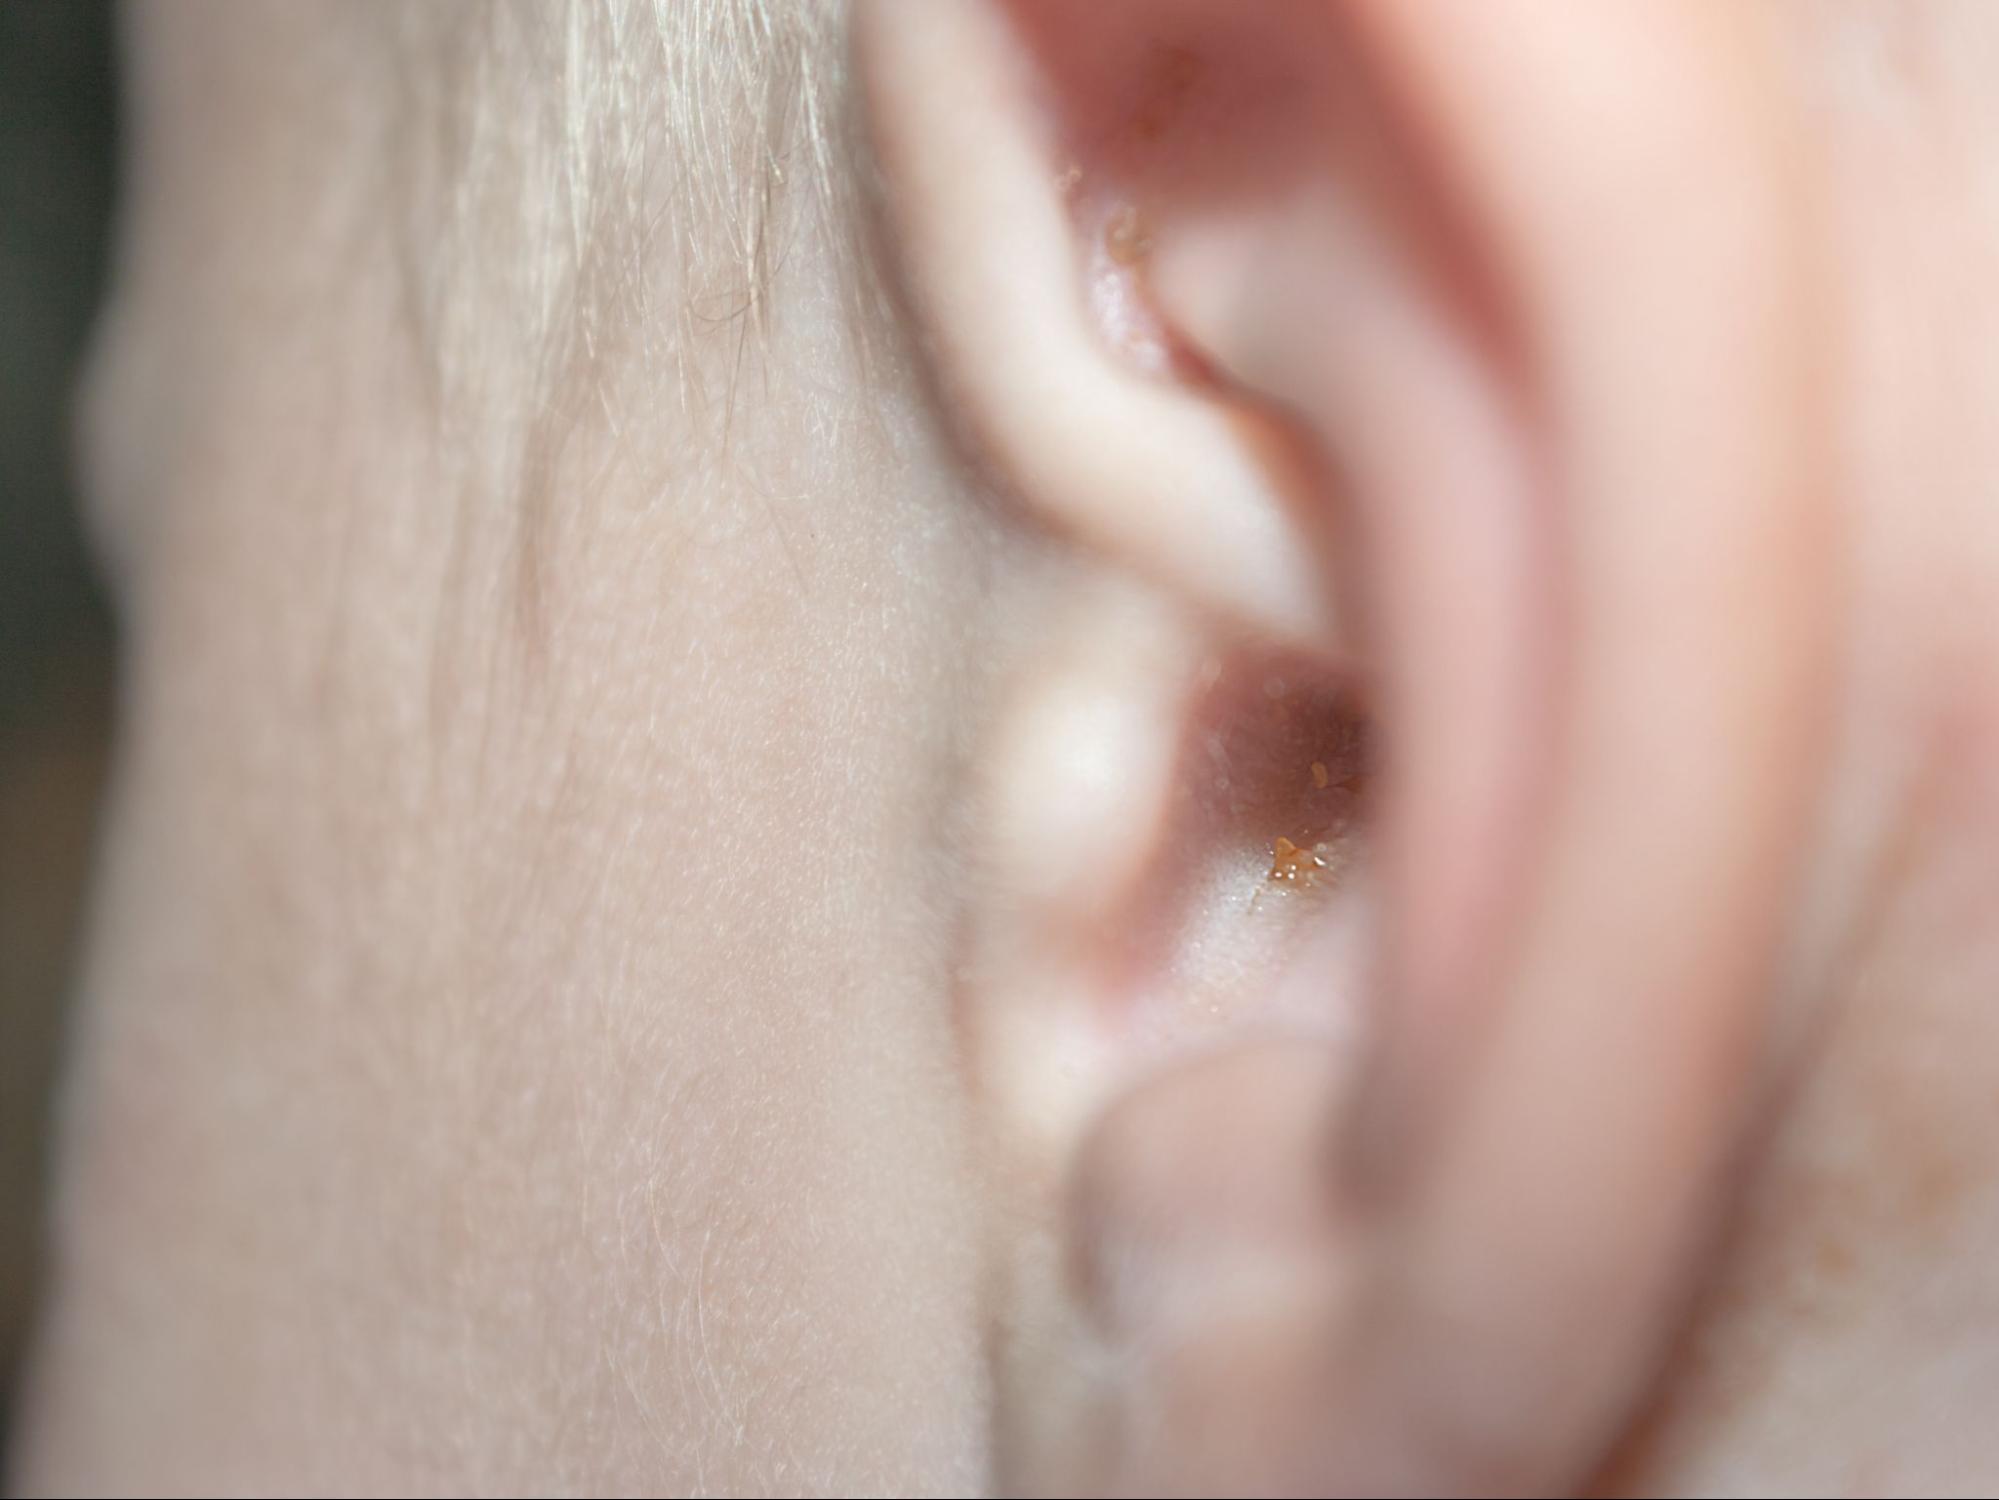 how to clean your ears: Close up shot of an ear with earwax